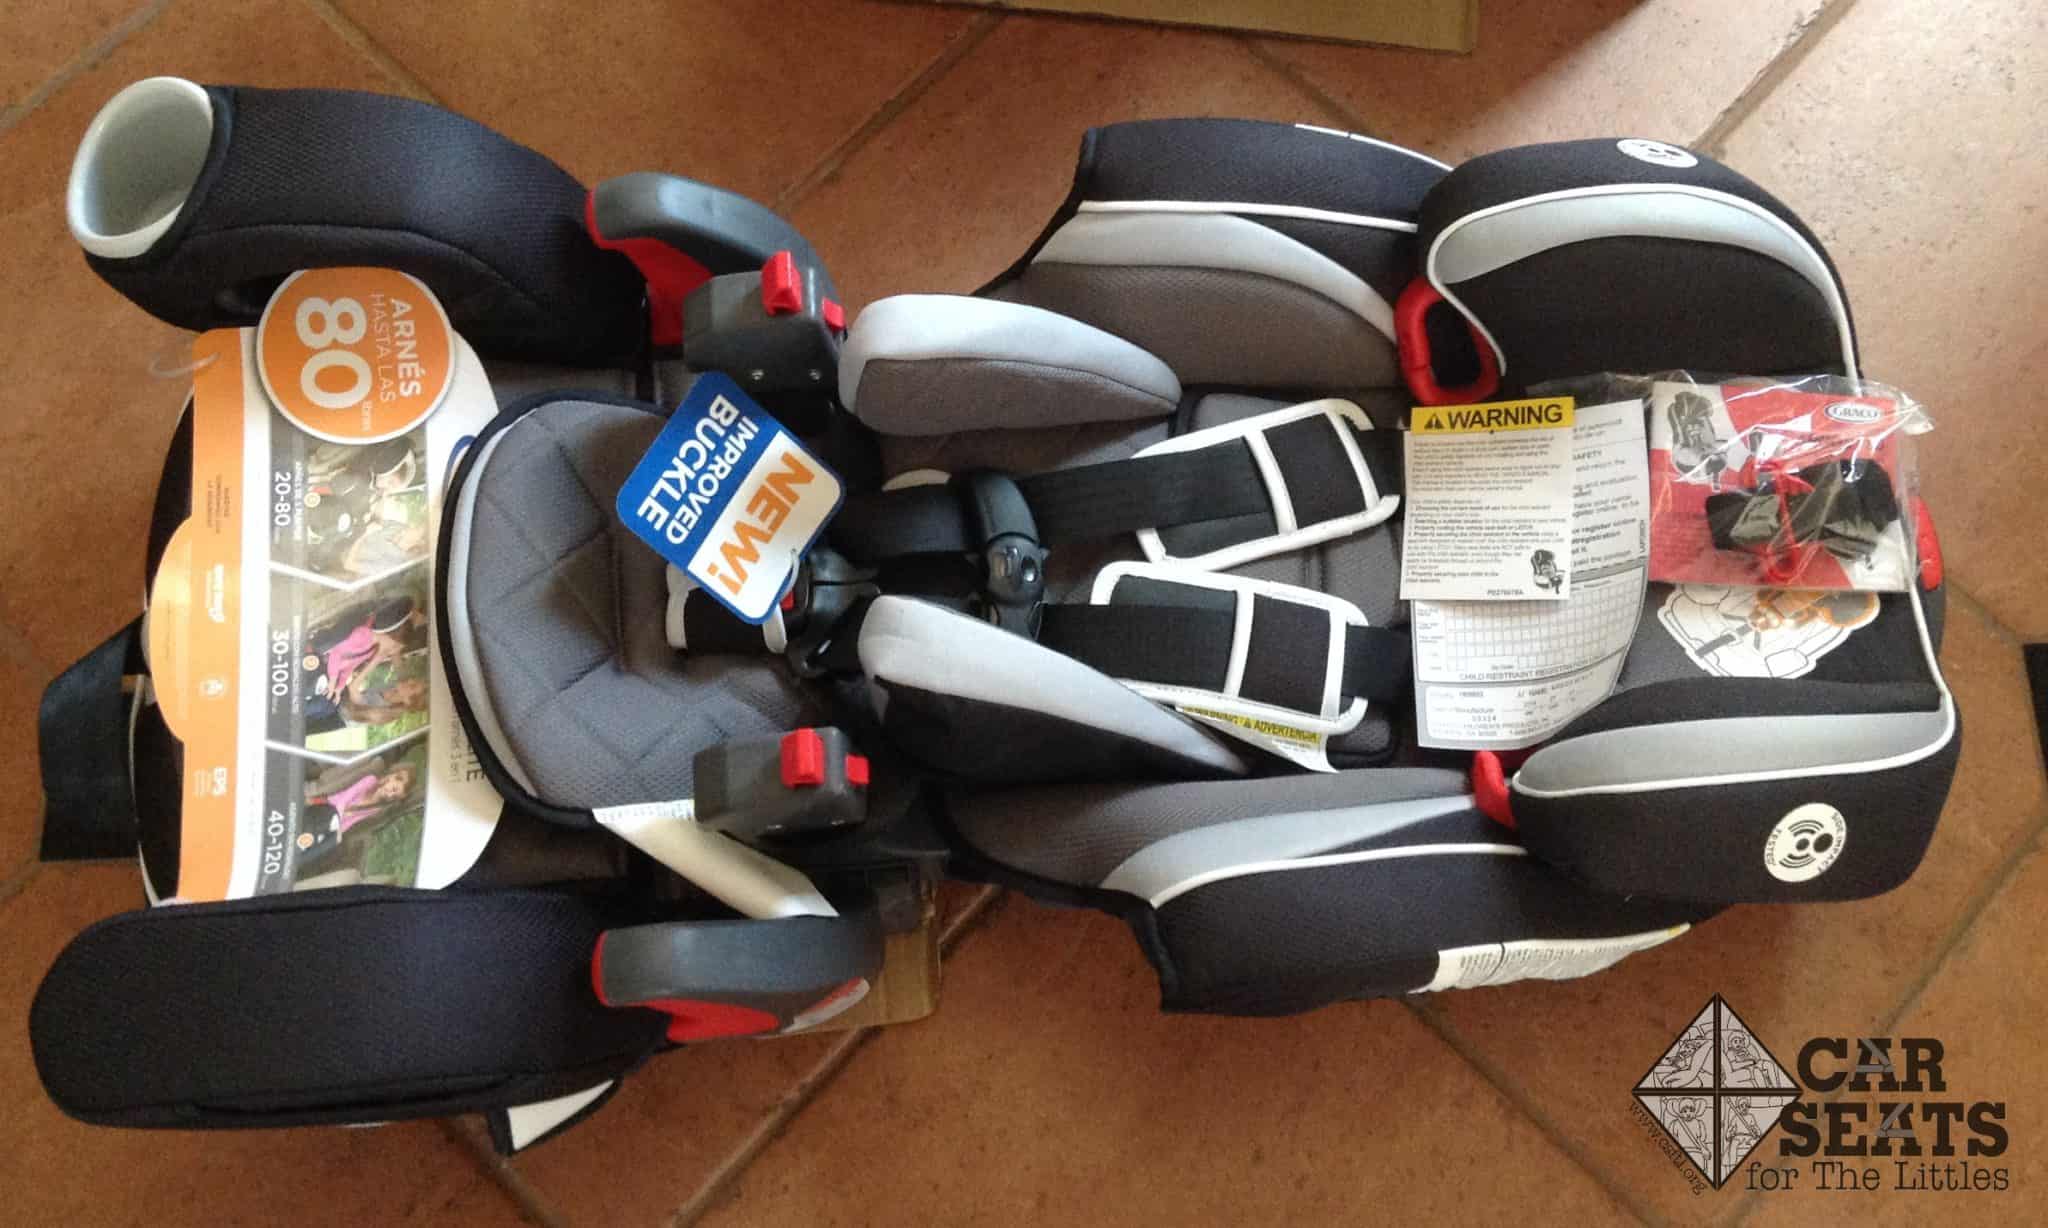 high back booster seat argos